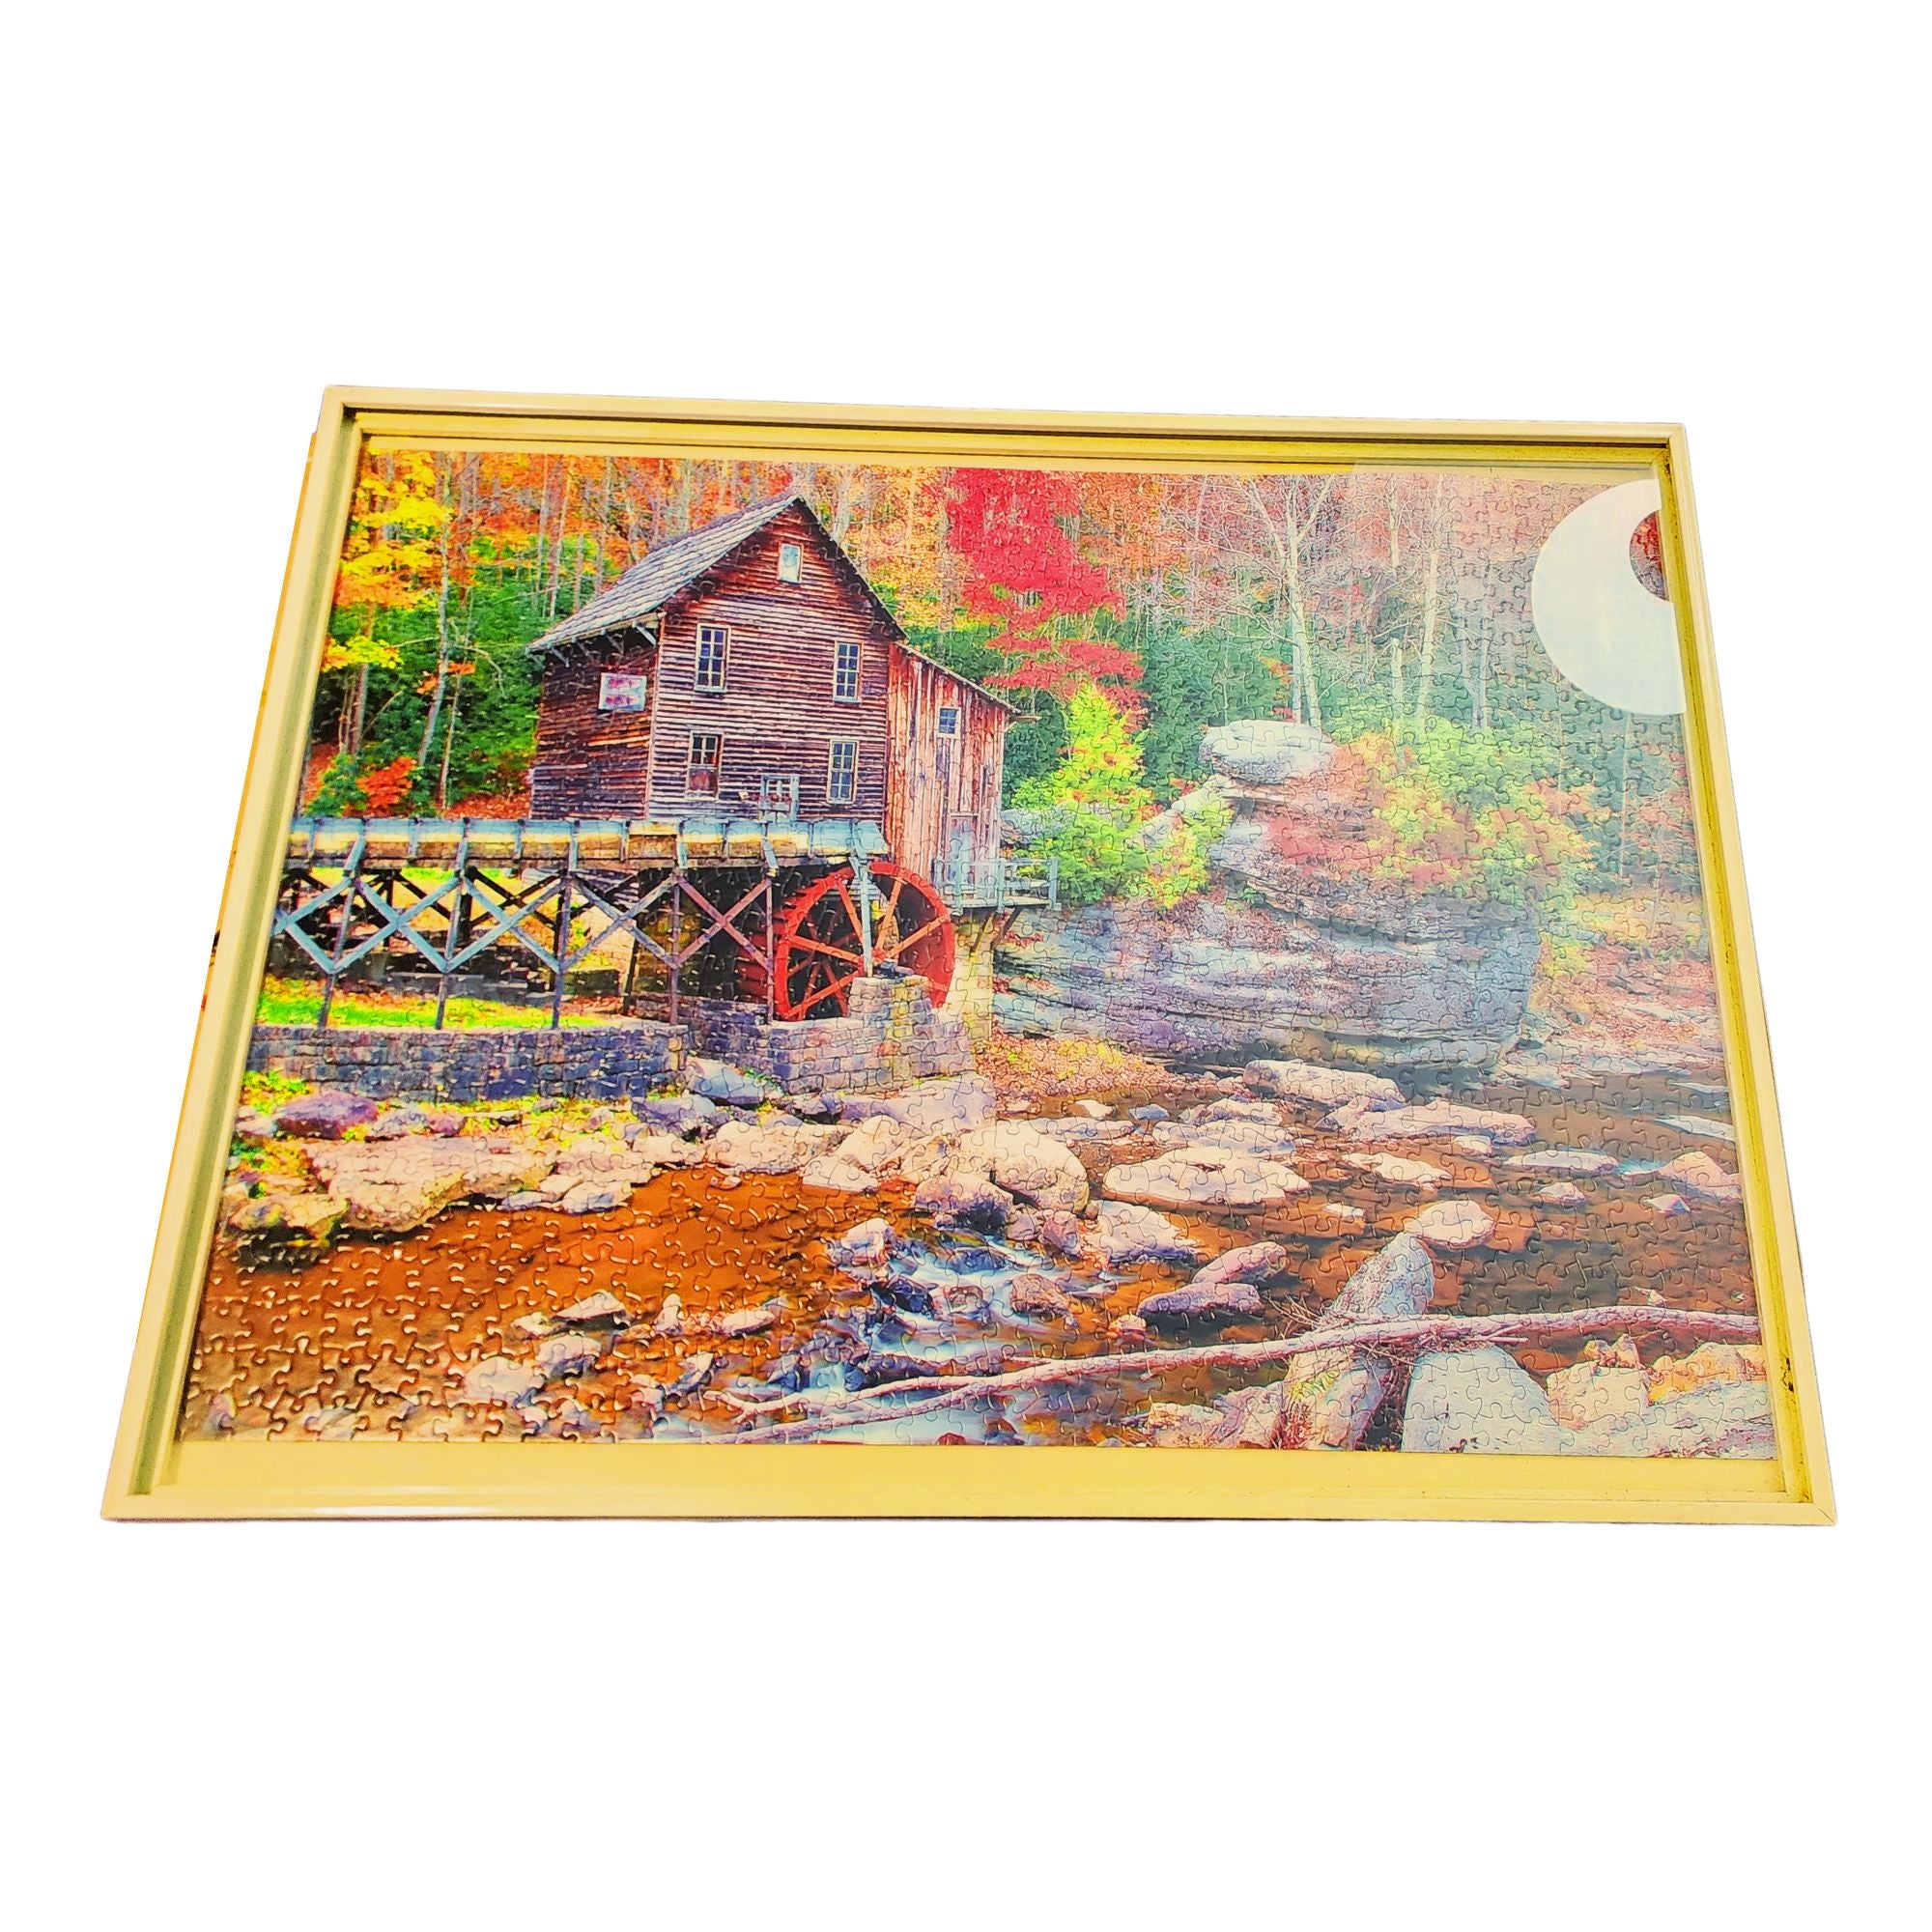 Completed Babstock Mill jigsaw puzzle - Twizzle Designs happy customer.